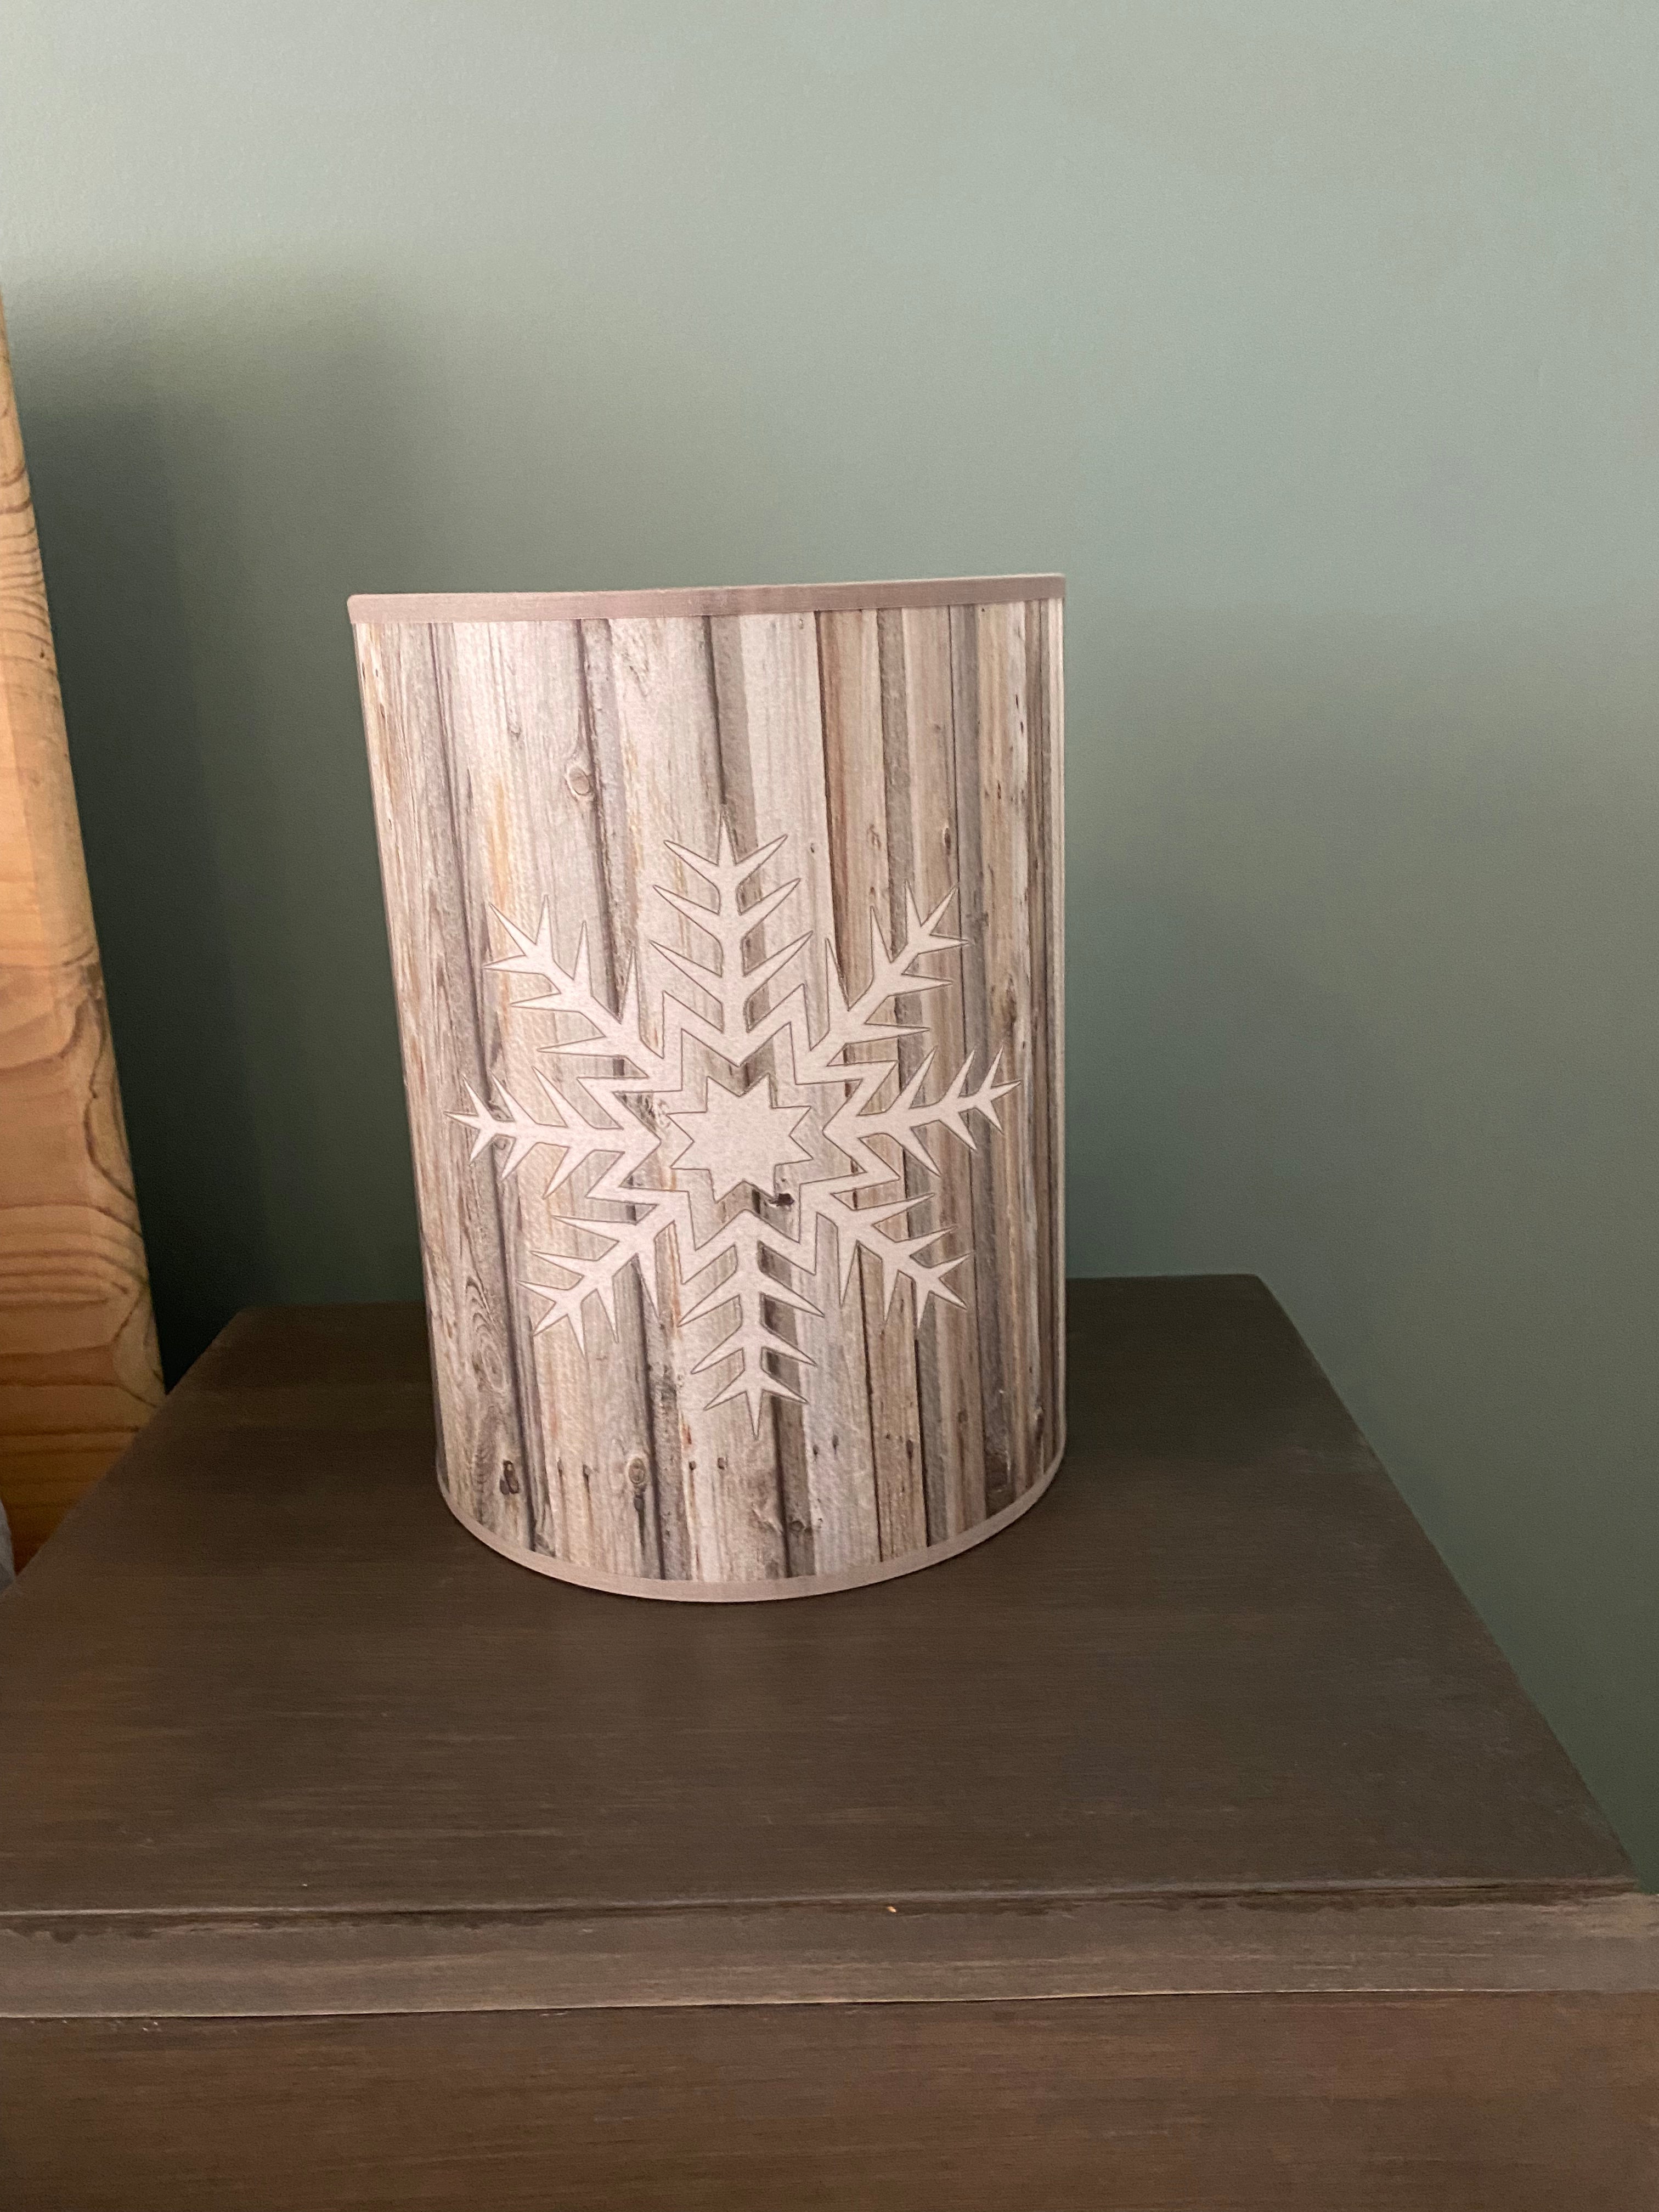 A  cylindrical table lamp made of a cylinder of canvas printed with a photo of wood grain, with a white snowflake embossed on opposing side of the lamp, against a green painted wall on a wooden table.